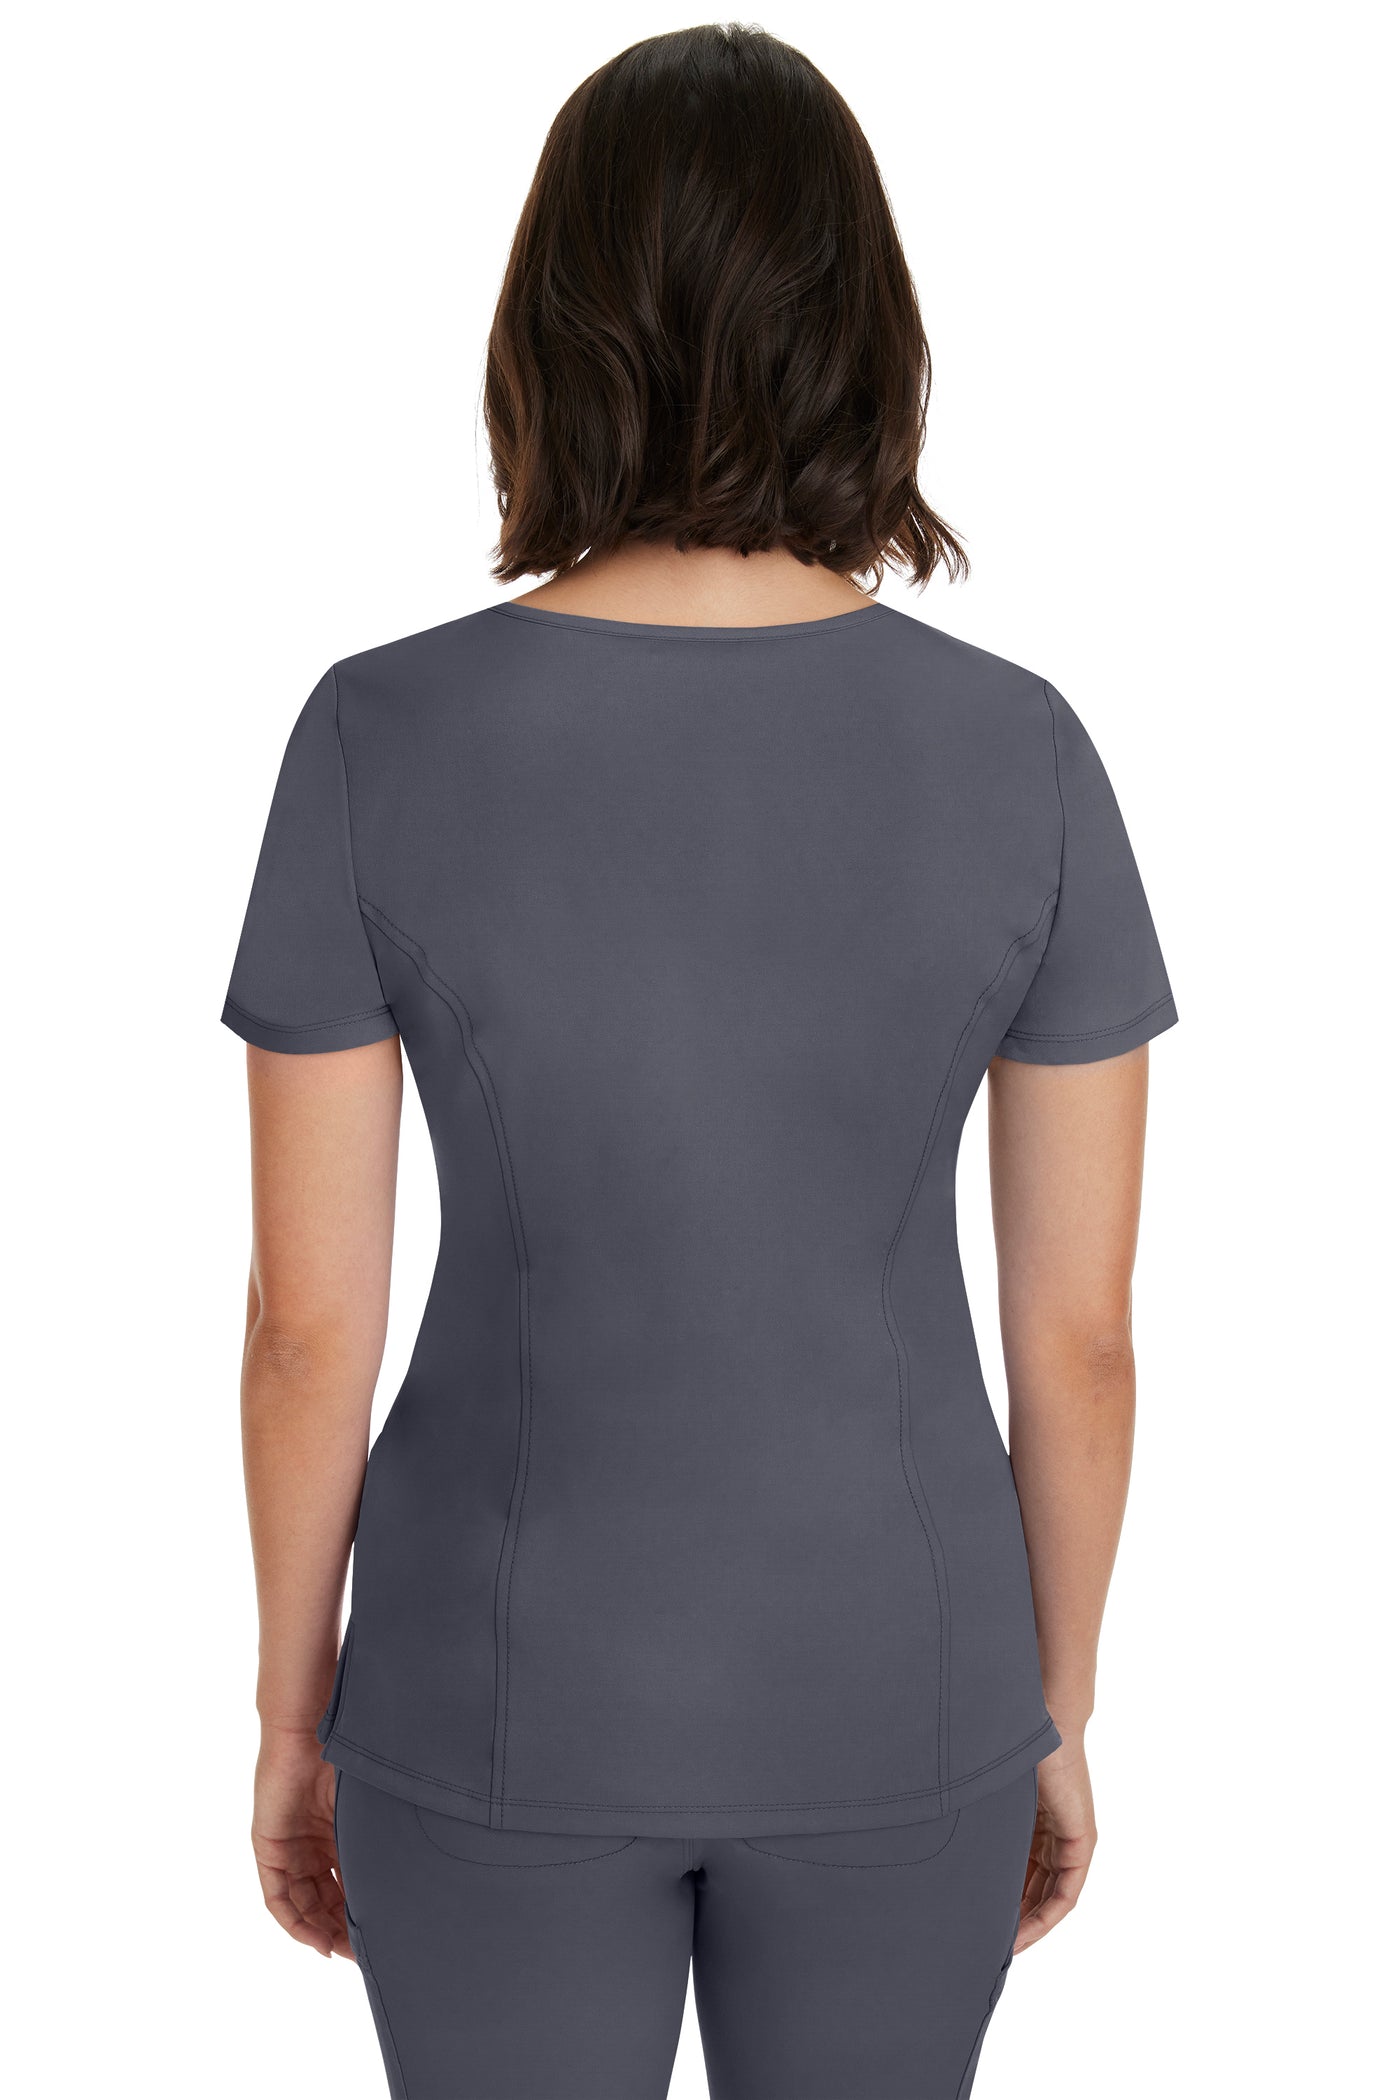 MADISON TOP by Healing Hands XXS-5XL/   PEWTER